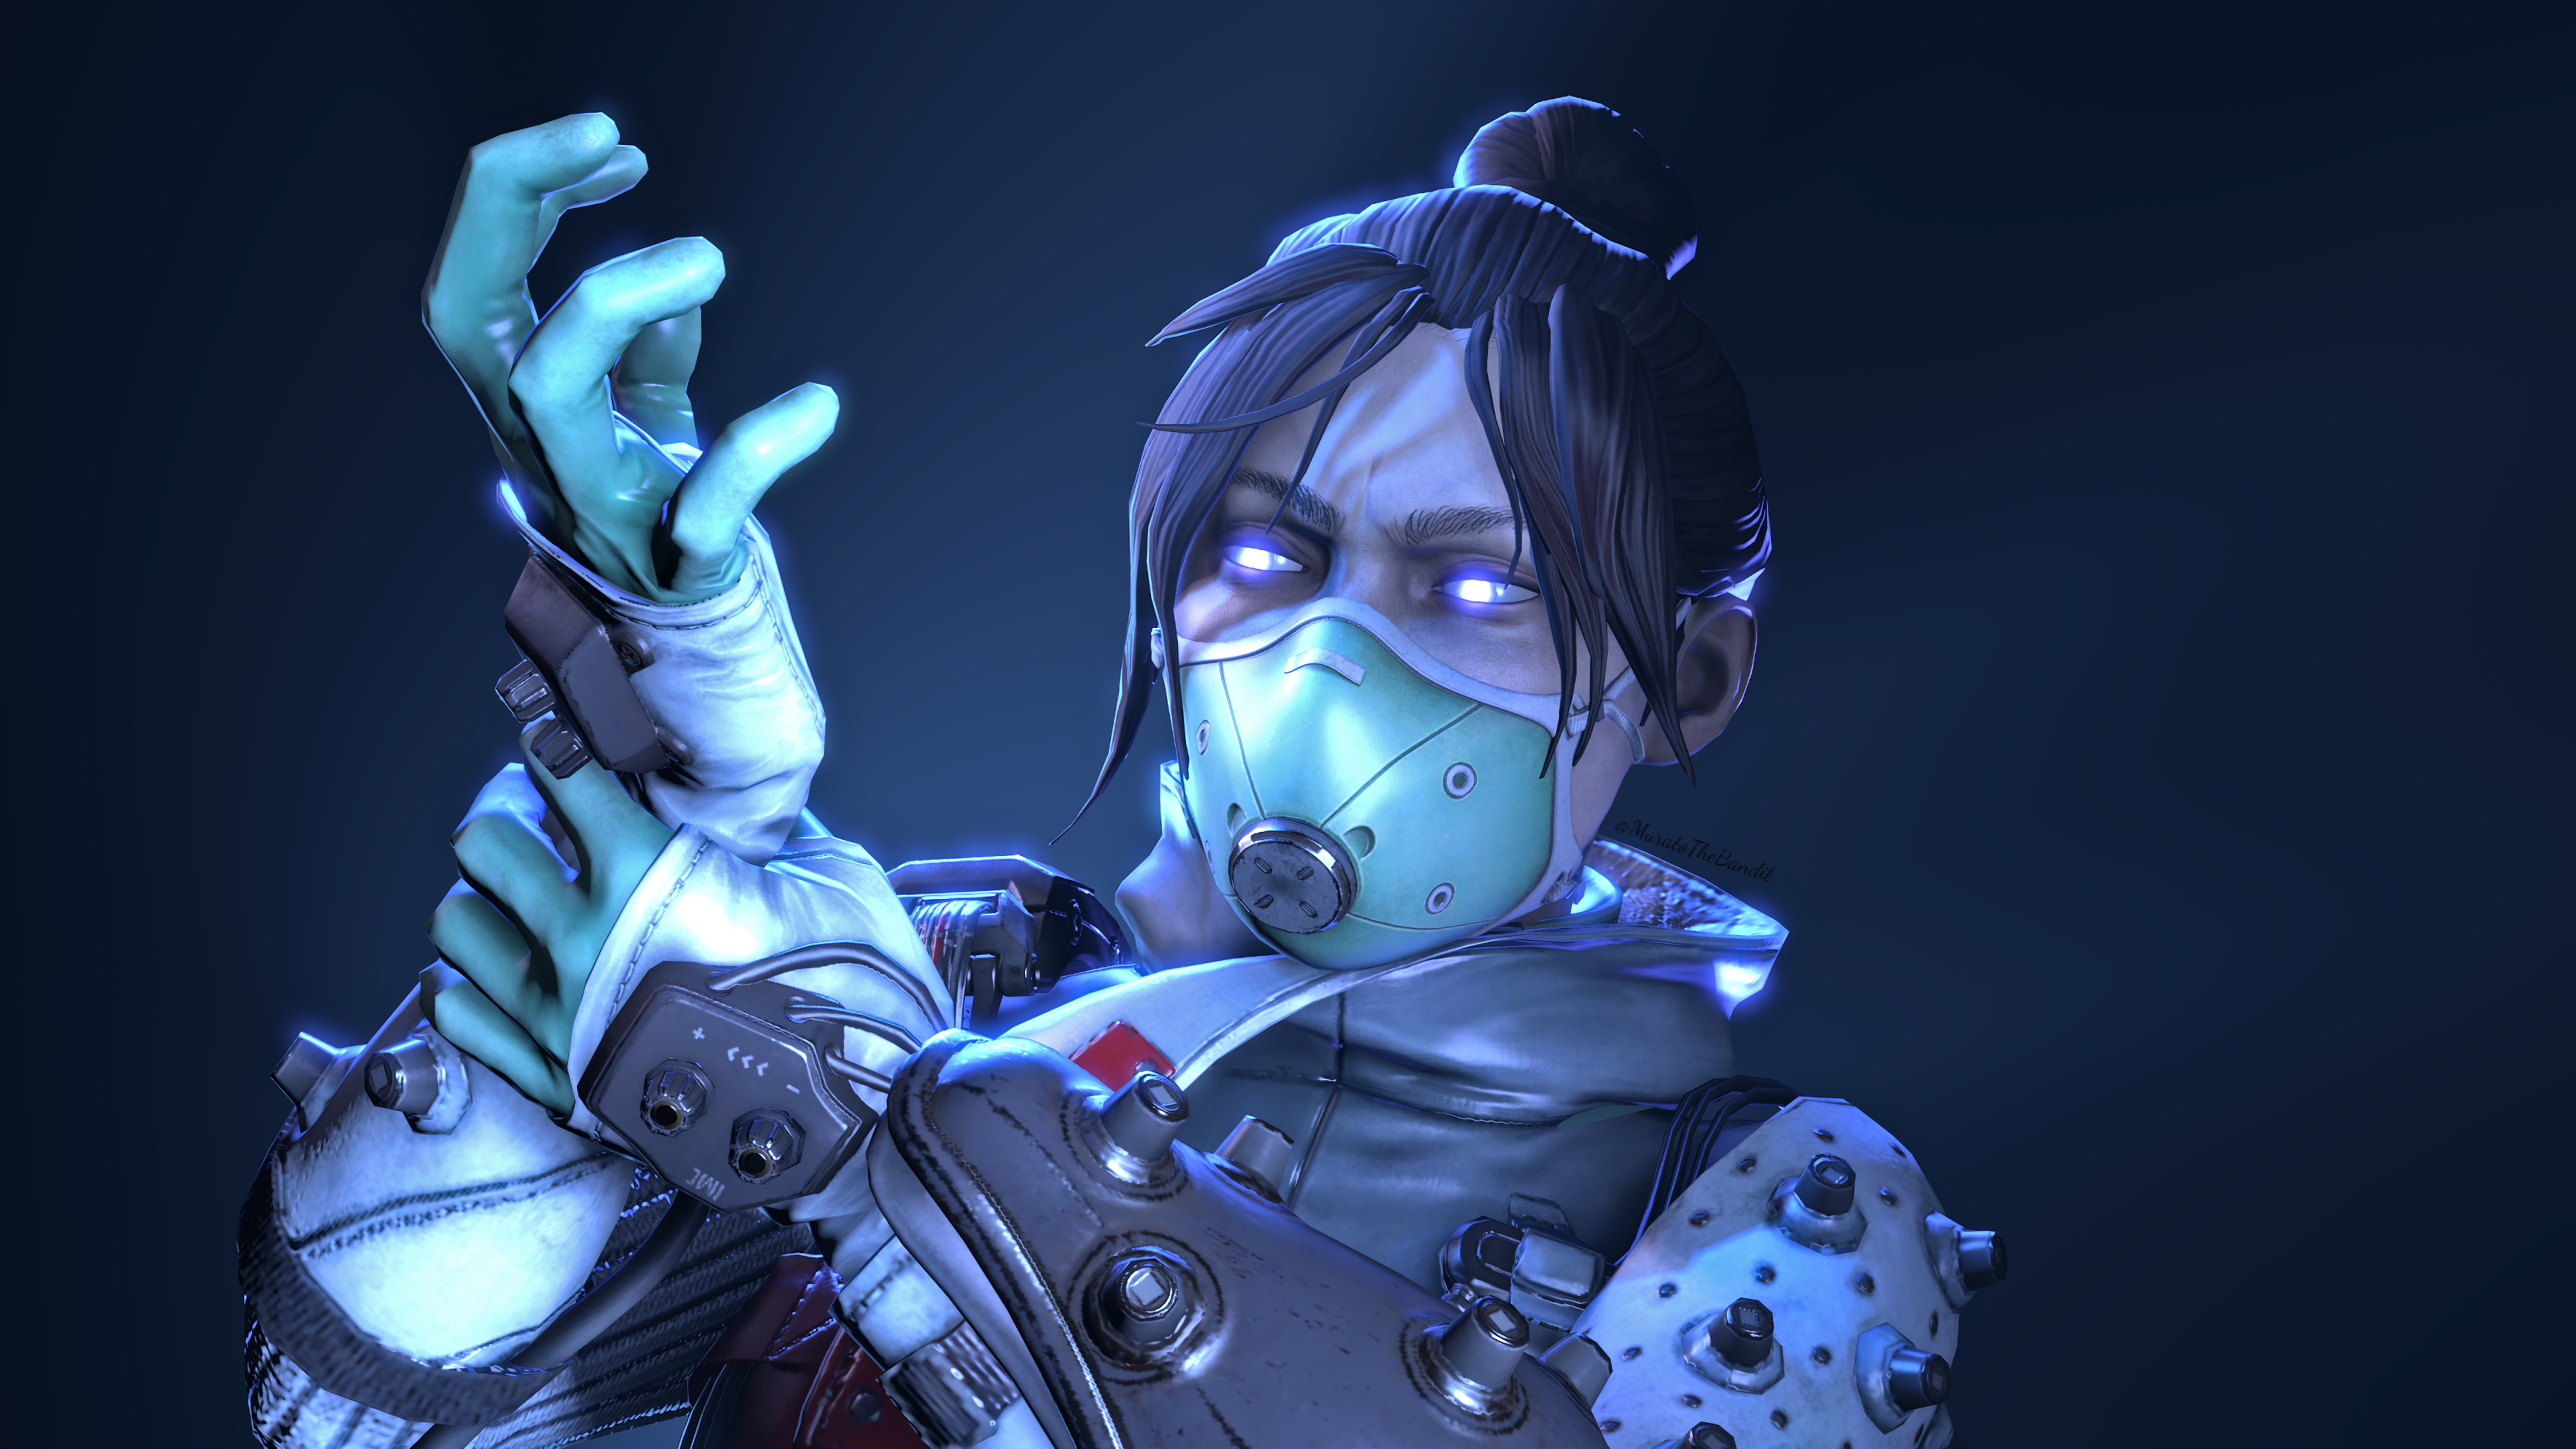 Wraith Apex Legends Hd Wallpapers Wallpaper Cave